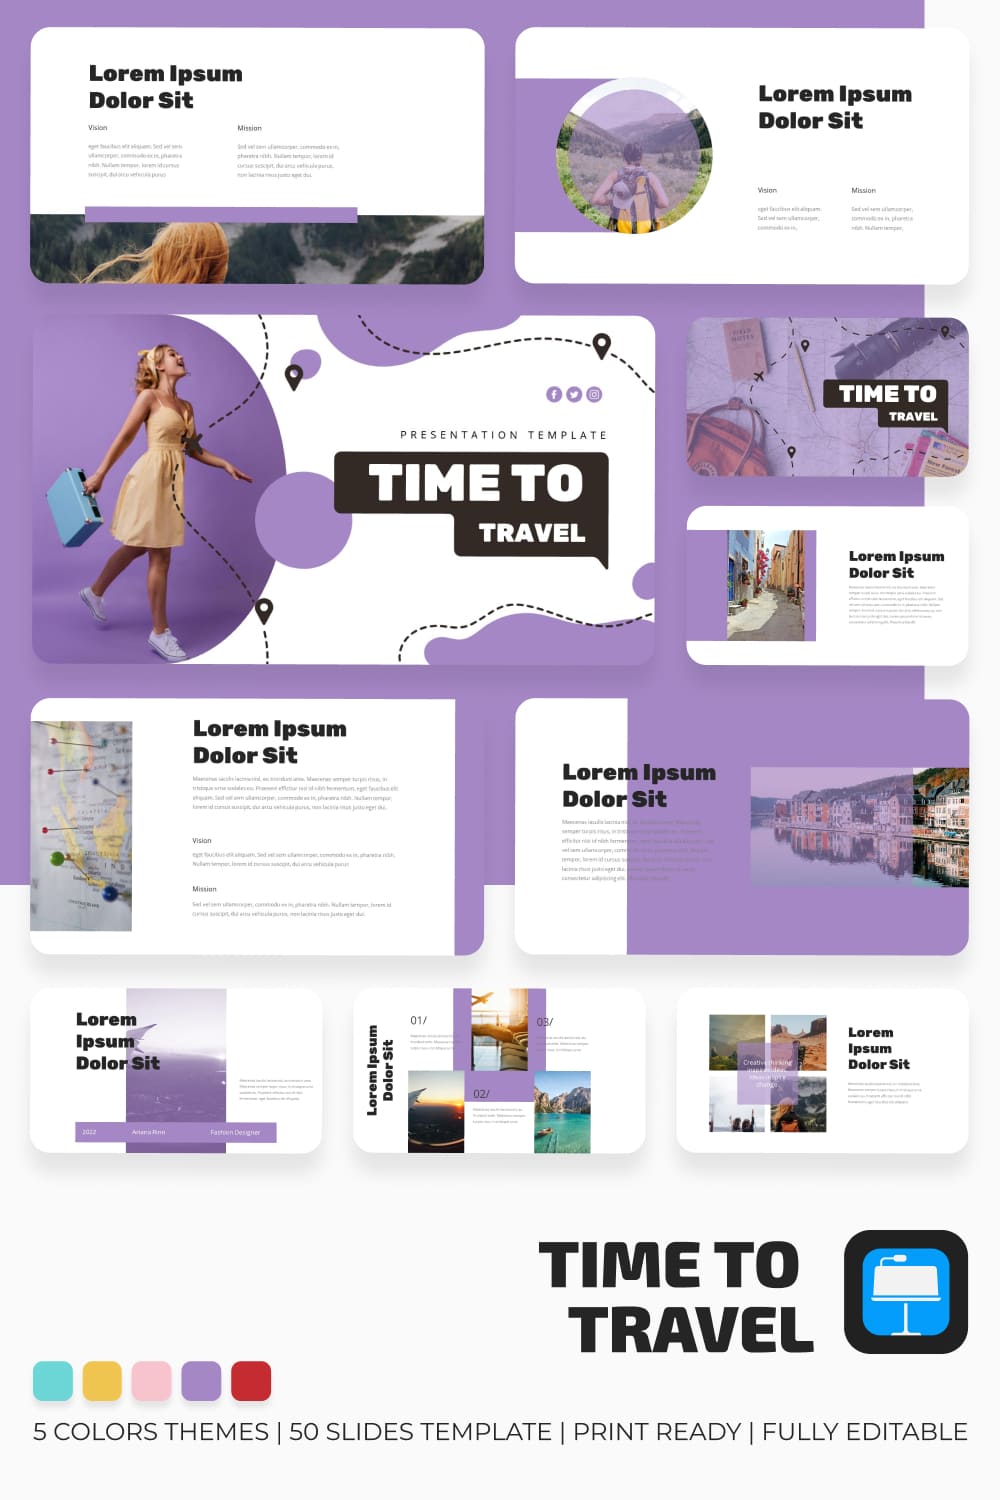 Time to Travel Keynote Template.